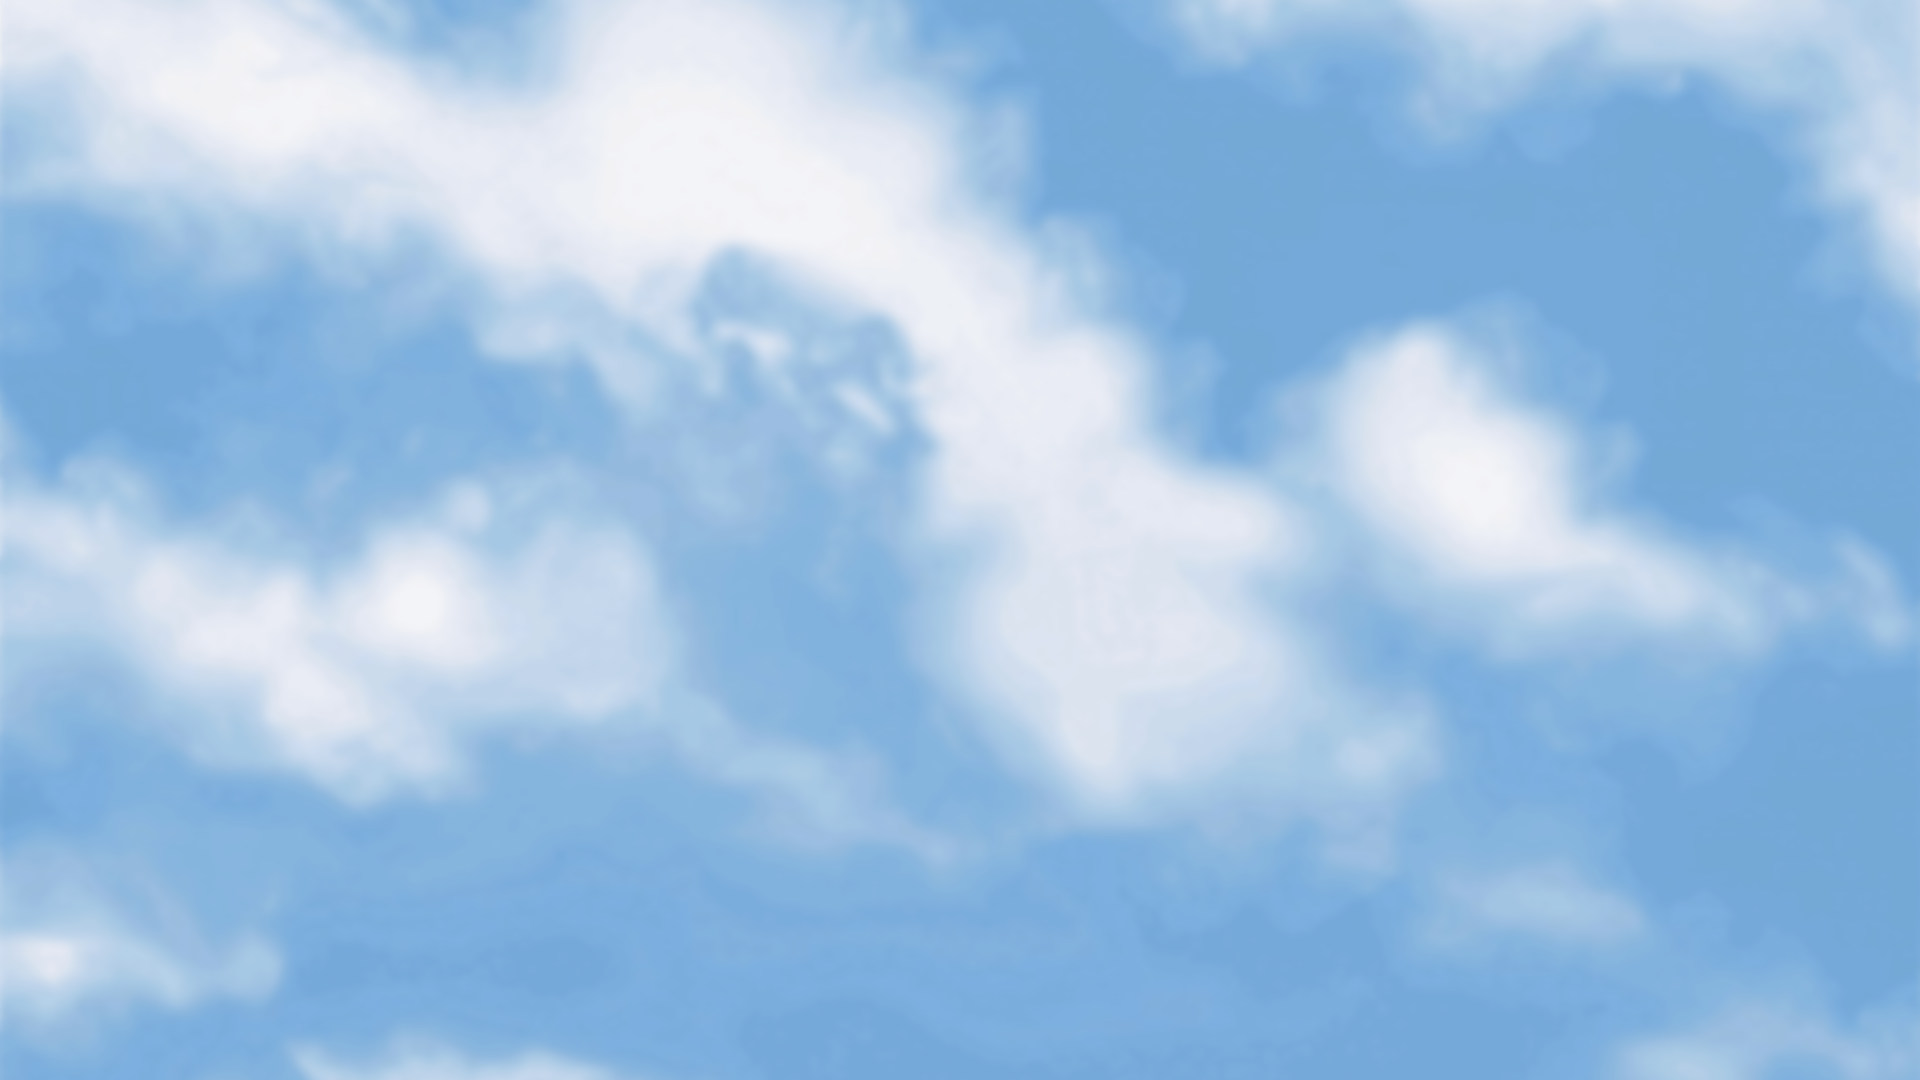 View topic - CLOUDS.BMP - BetaArchive